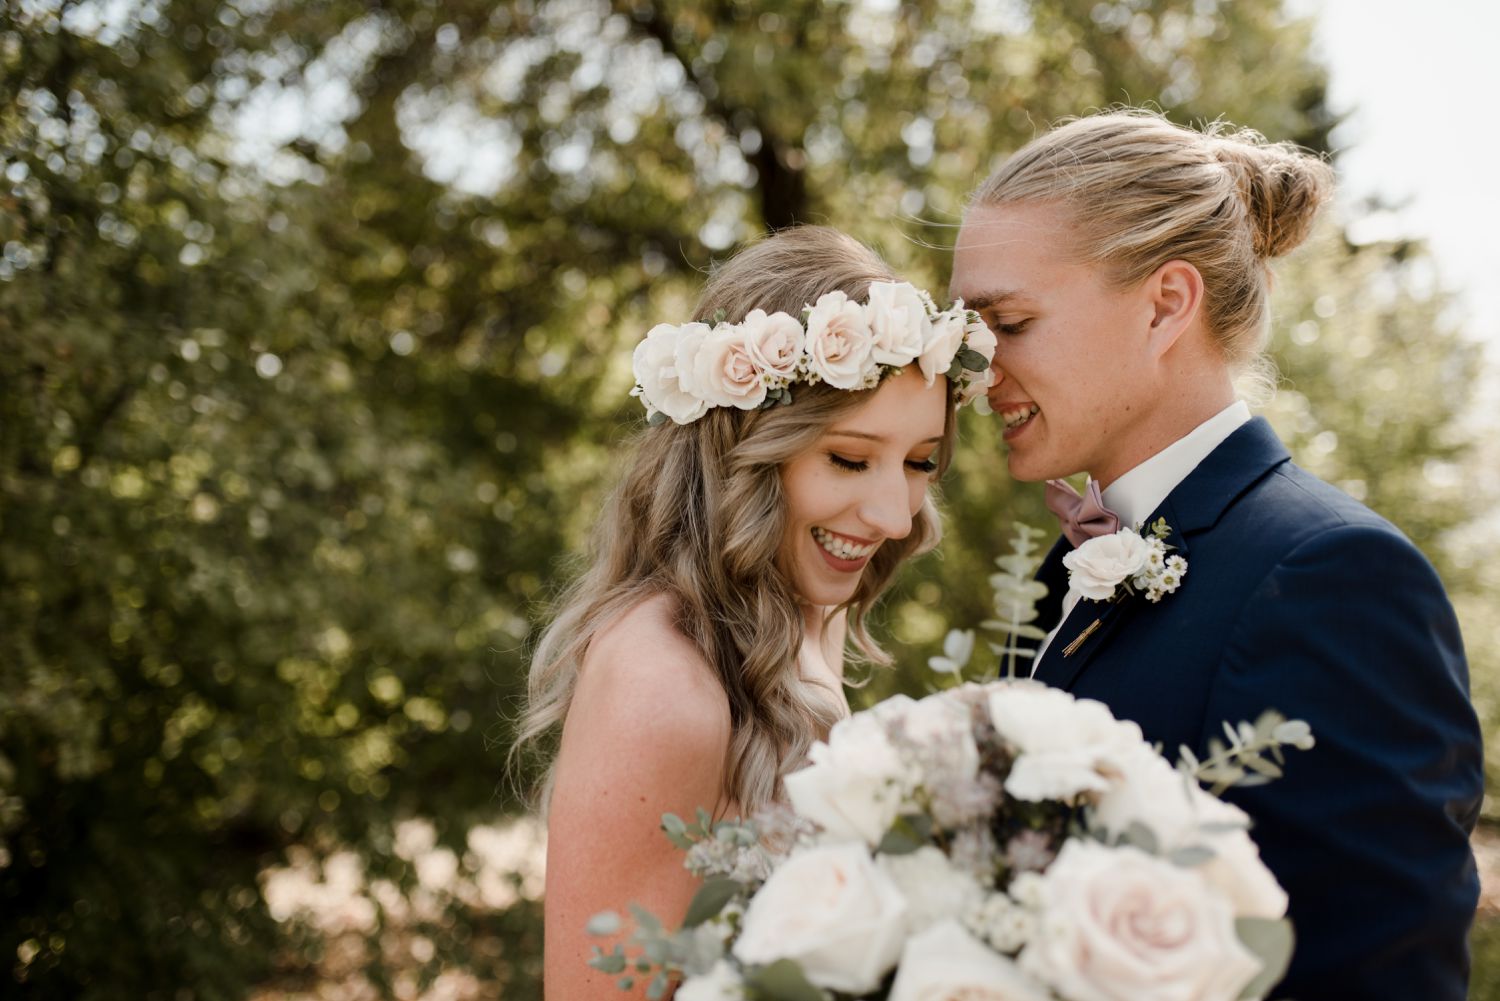 Ashgrove Acres Wedding in Winnipeg Manitoba, bridal flower crowns and fresh florals, photographed by Vanessa Renae Photography, a Winnipeg and Kenora wedding photographer